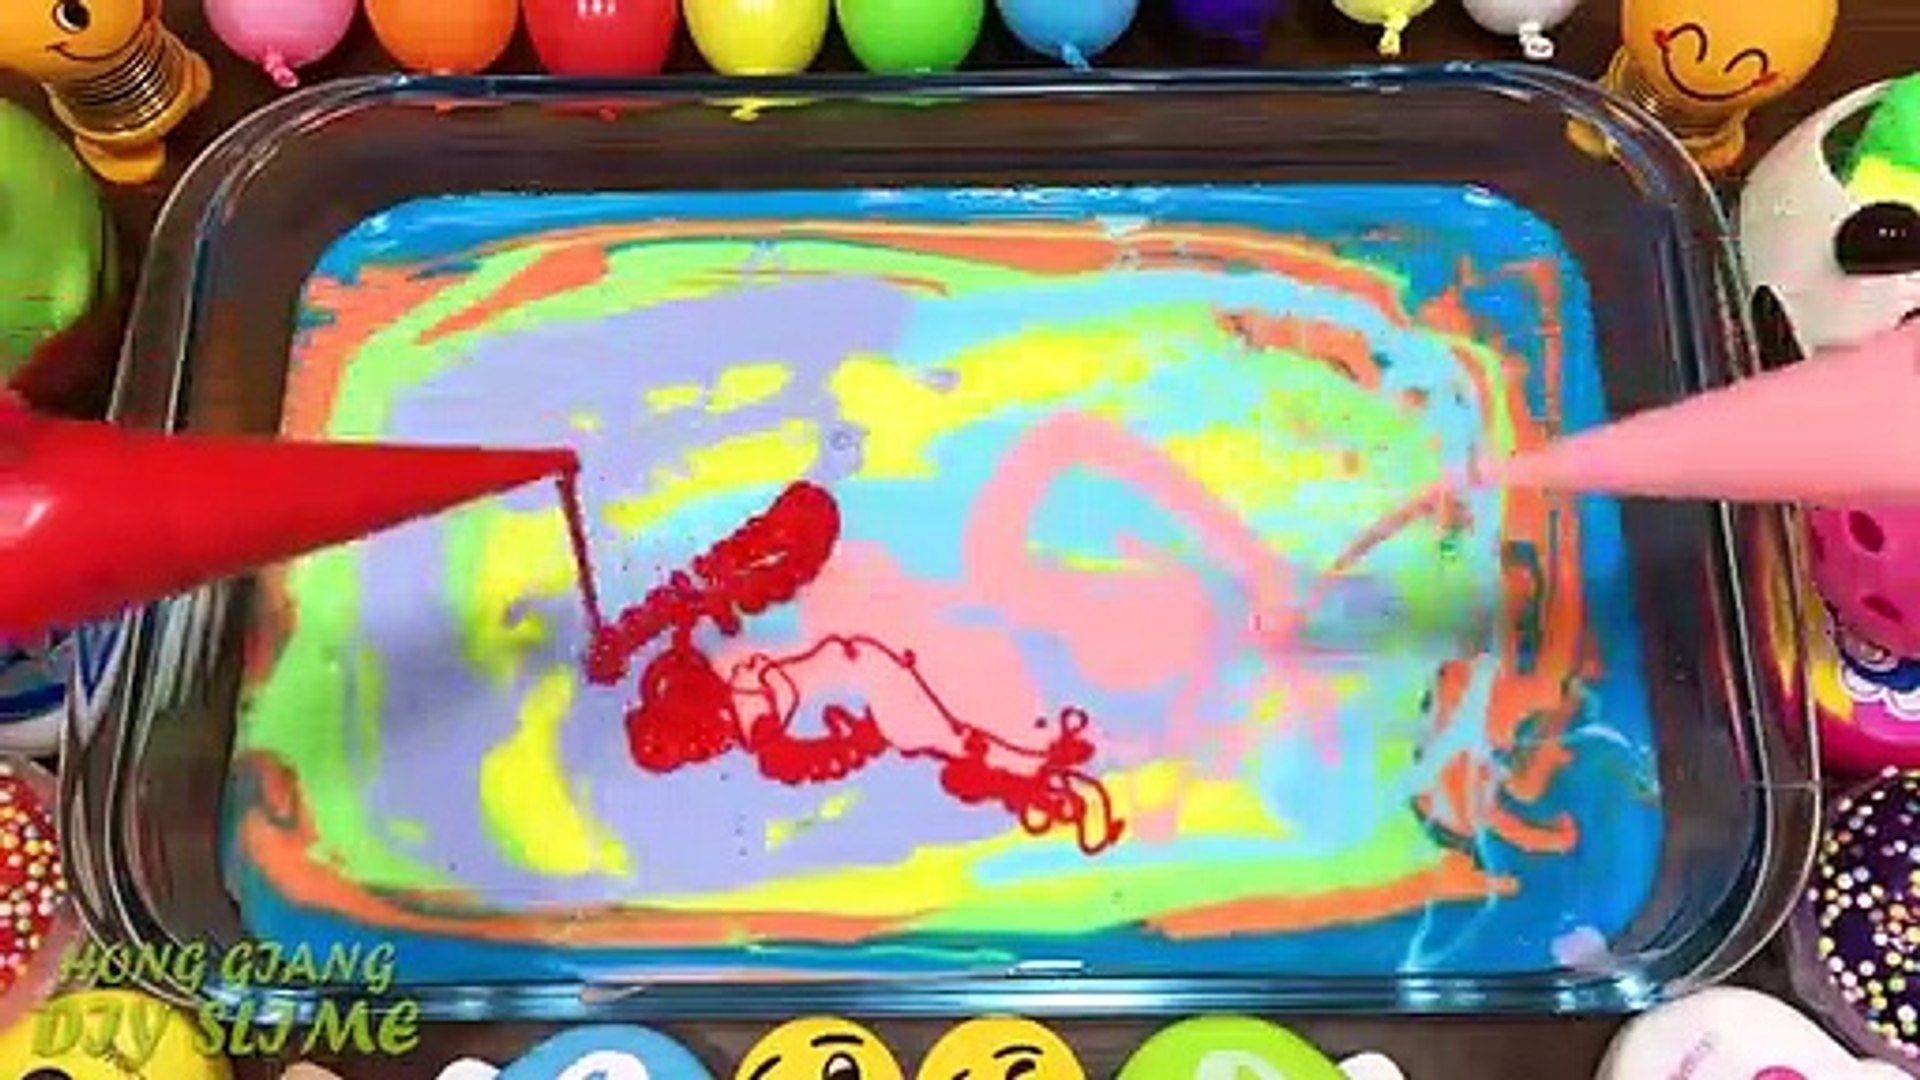 Making Slime with Piping Bags #2 ! Mixing Clay and Glitter into Slime !  Satisfying Slime - Dailymotion Video